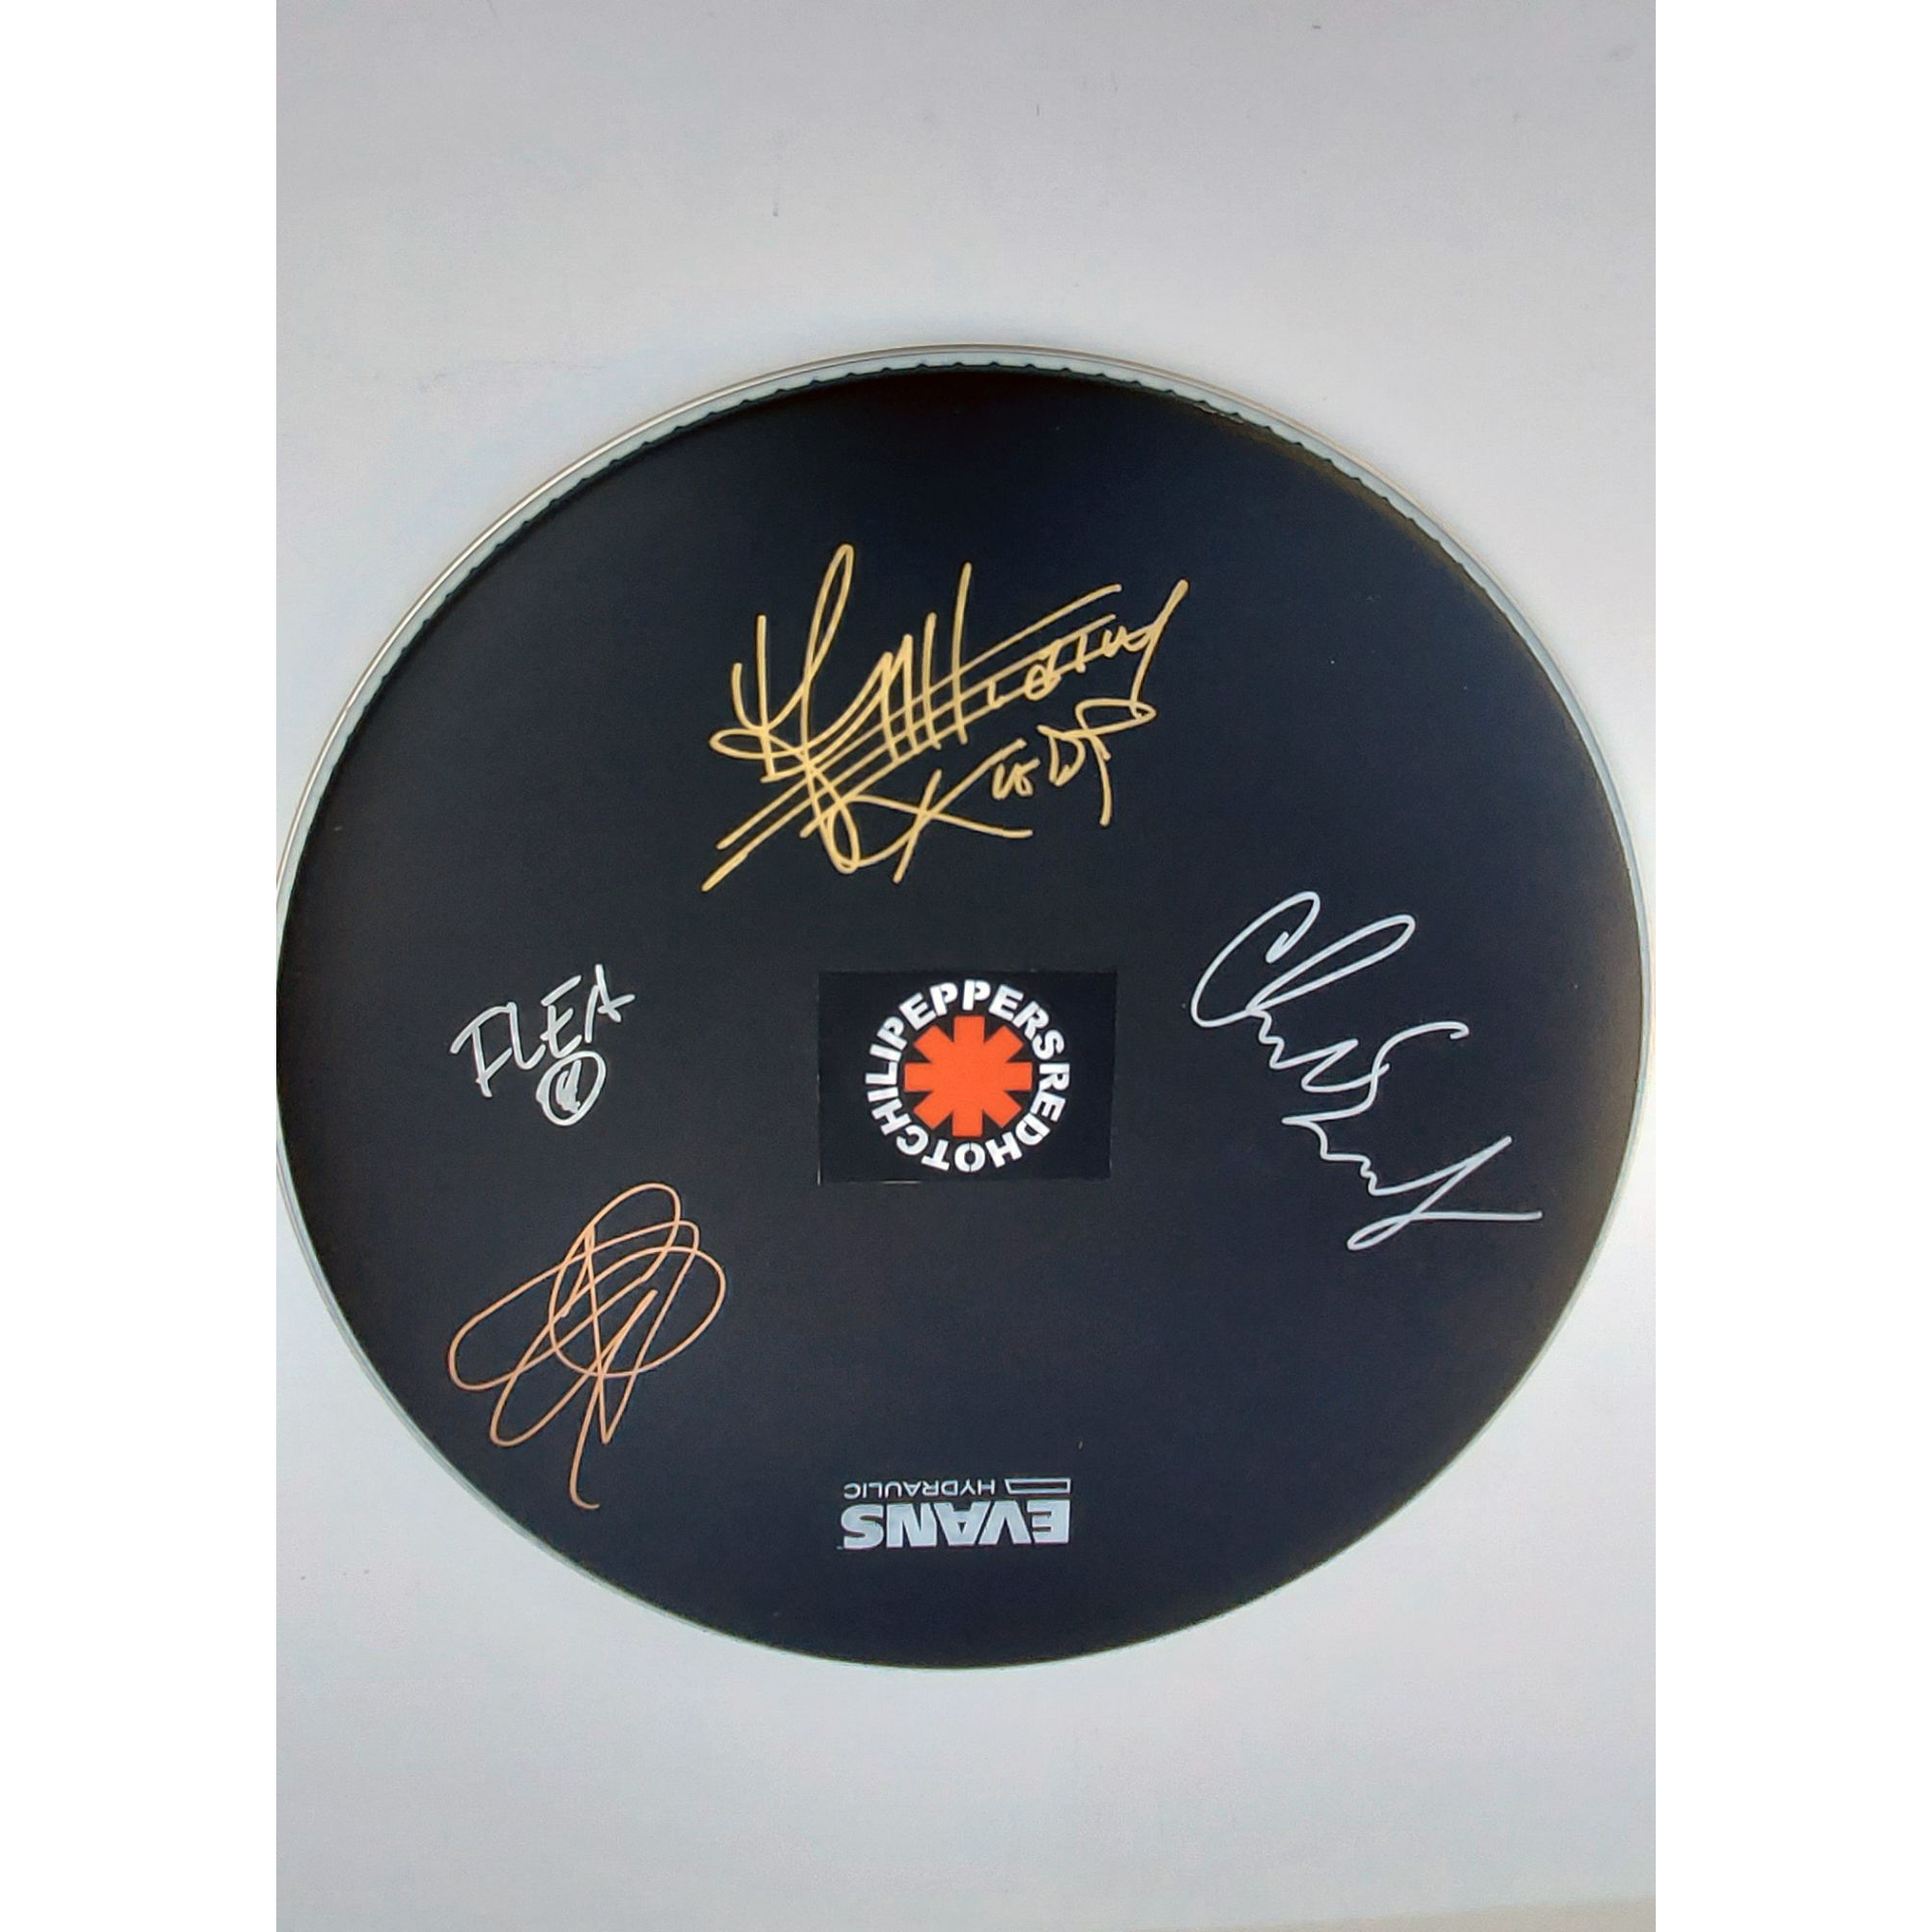 Anthony Kiedis, Flea, Chad Smith, Red Hot Chili Peppers 14-inch drum head signed with proof